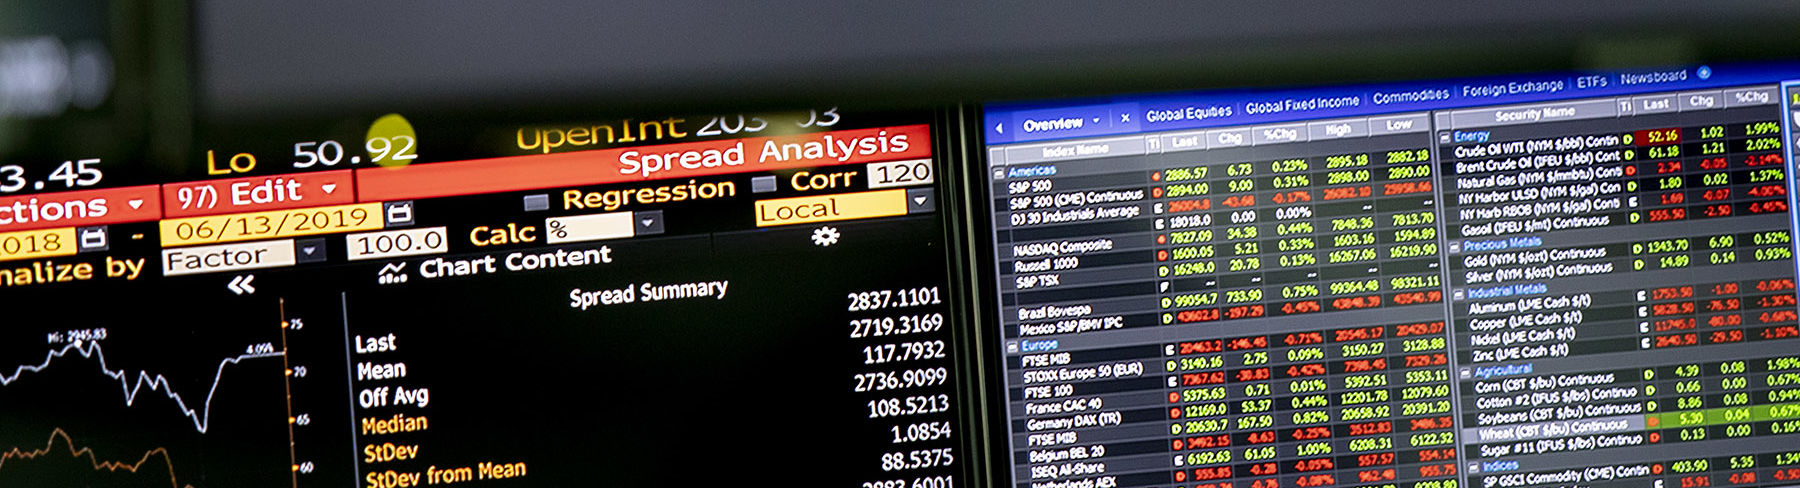 A close-up image of computer screens displaying financial information in graphs and tables